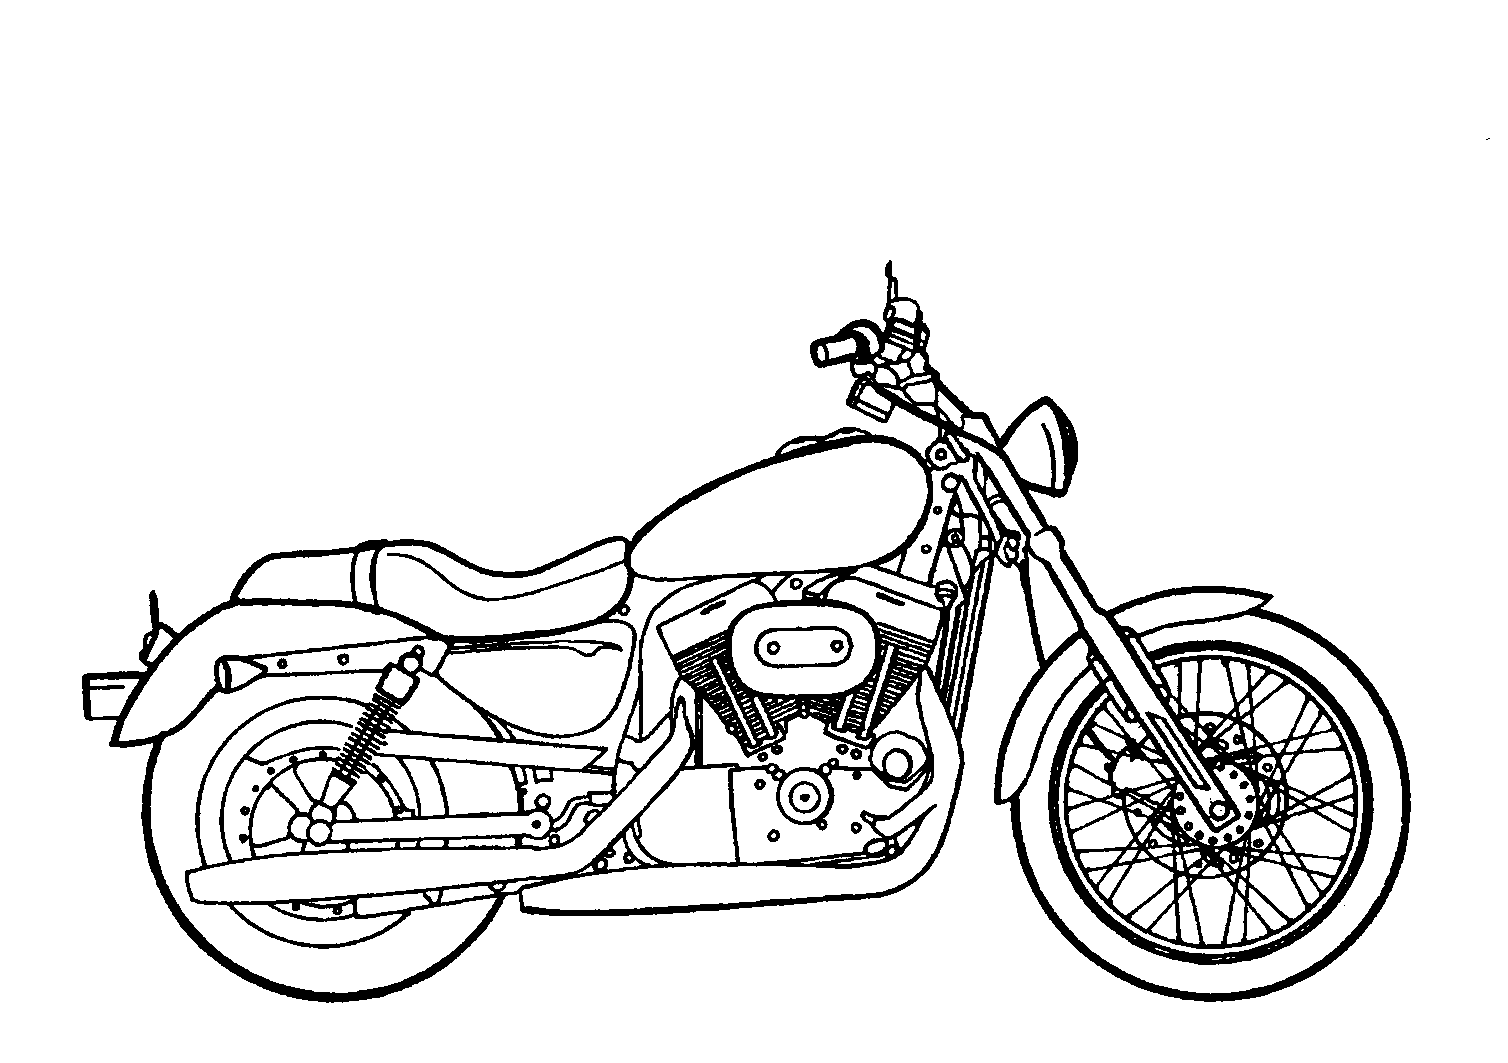 Motorcycle black and white harley motorcycle clipart black